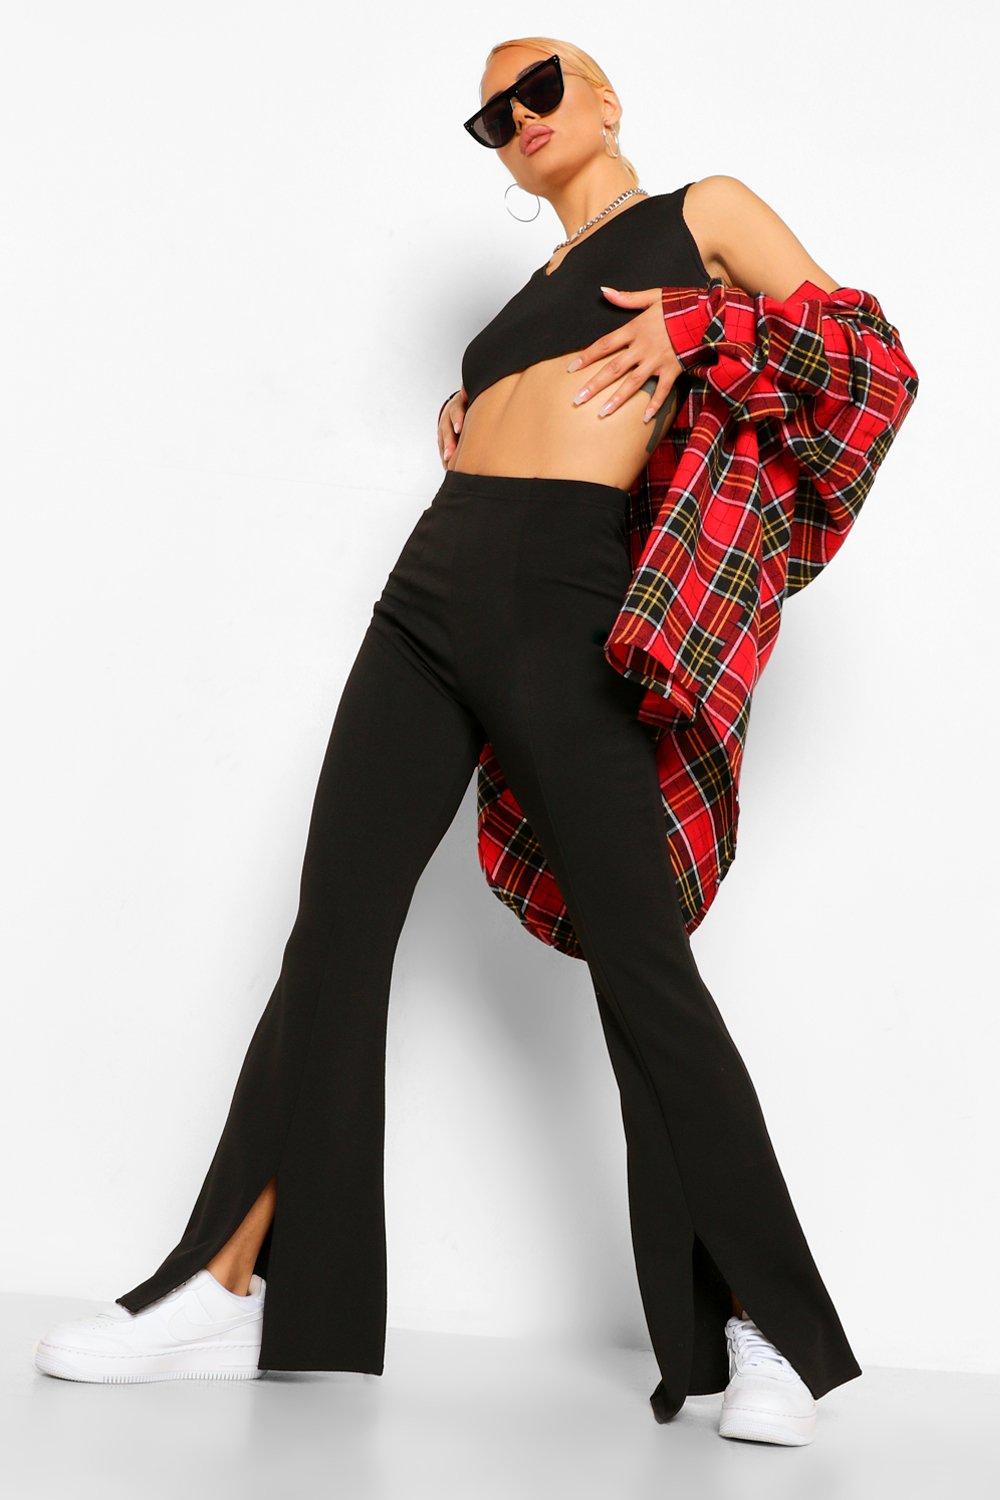 Missguided flare trousers in black